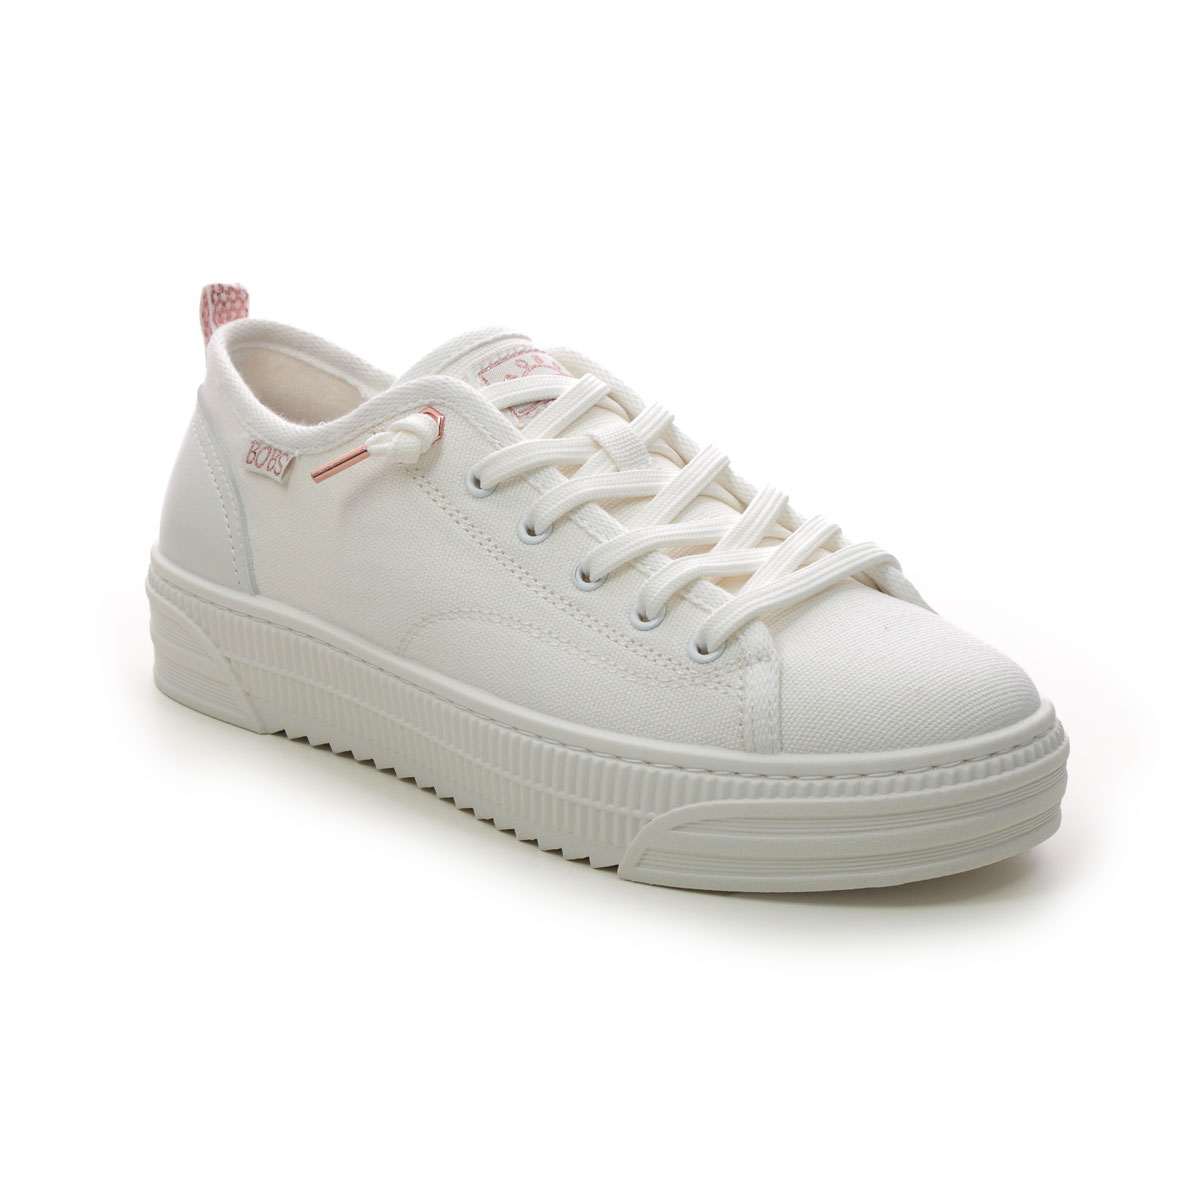 Skechers Bobs Copa OFWT Off White Womens trainers 114640 in a Plain Textile in Size 7